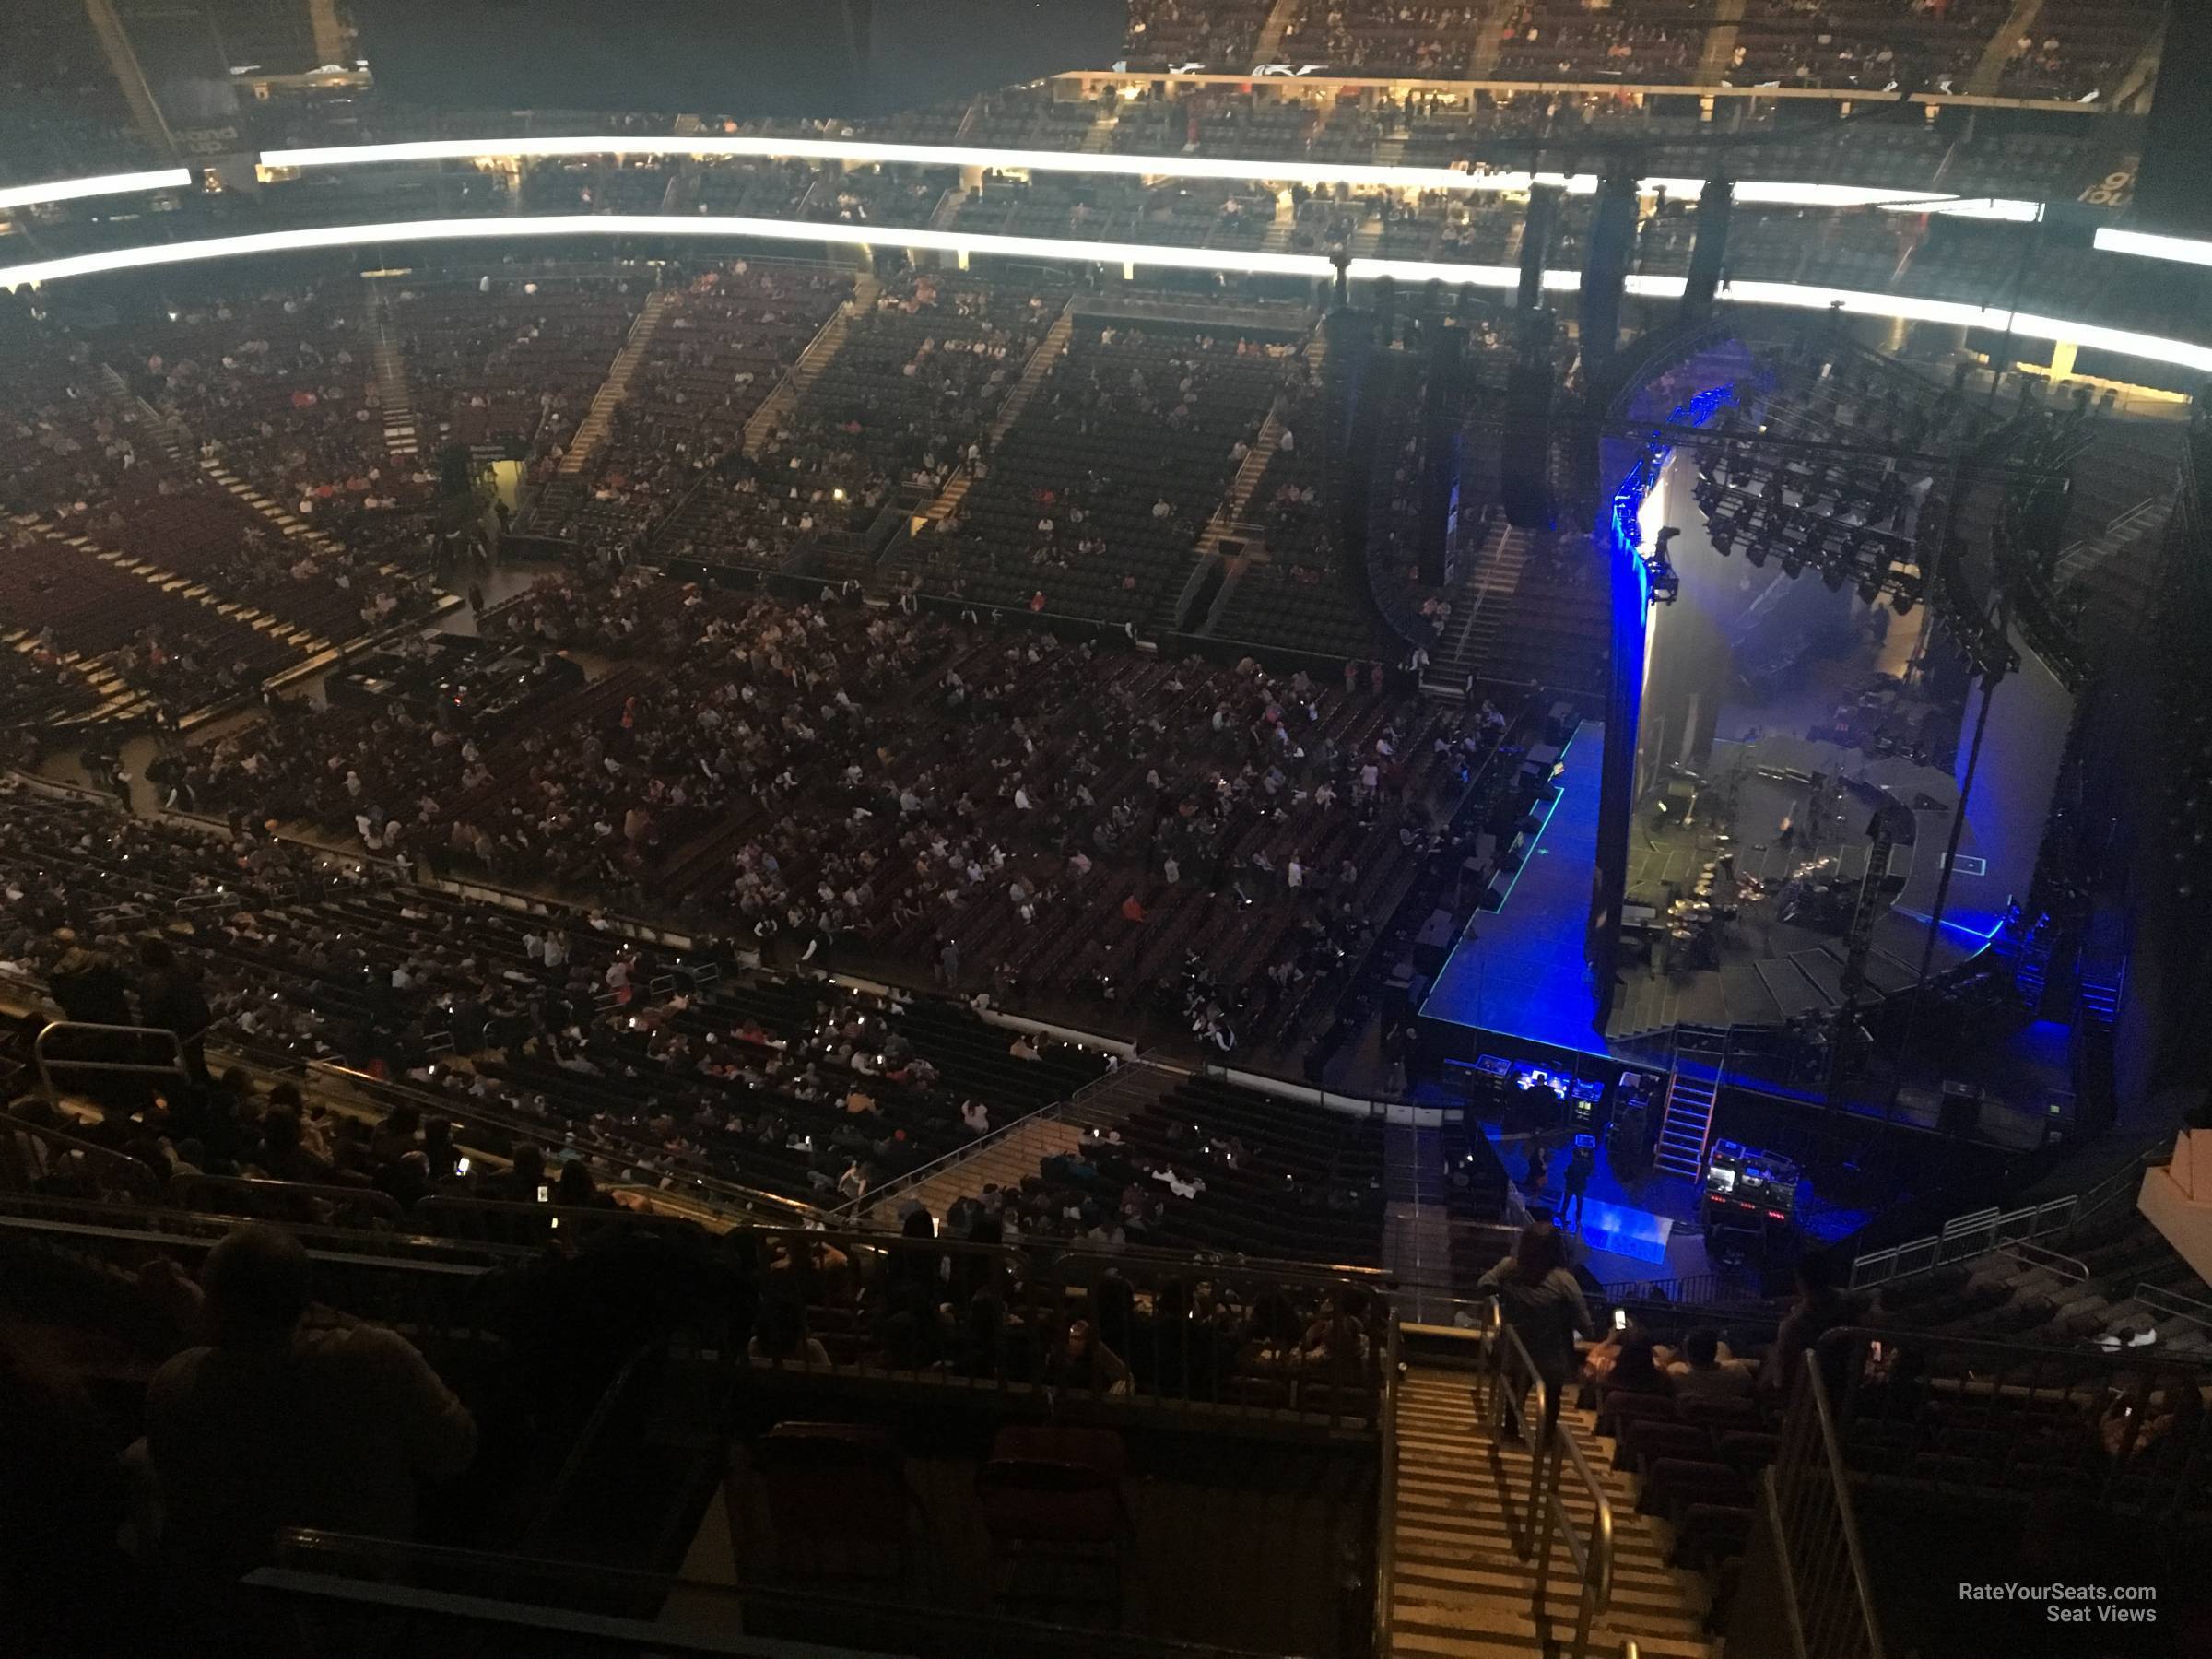 section 215, row 4 seat view  for concert - prudential center